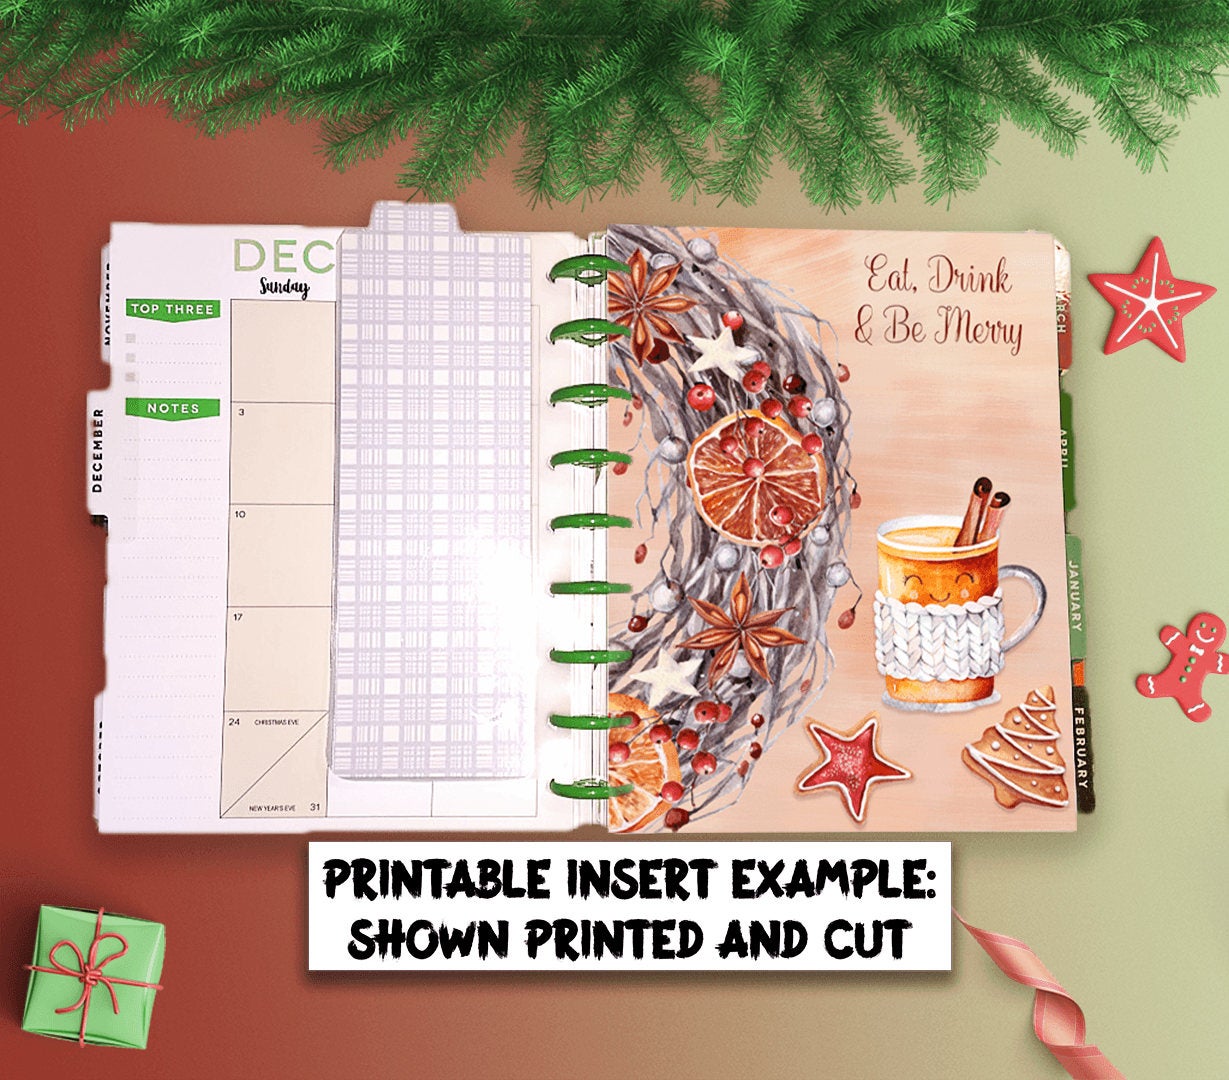 Christmas Dashboard to fit Erin Condren Planners - A Holiday printable download featuring the text 'Eat, Drink and Be Merry